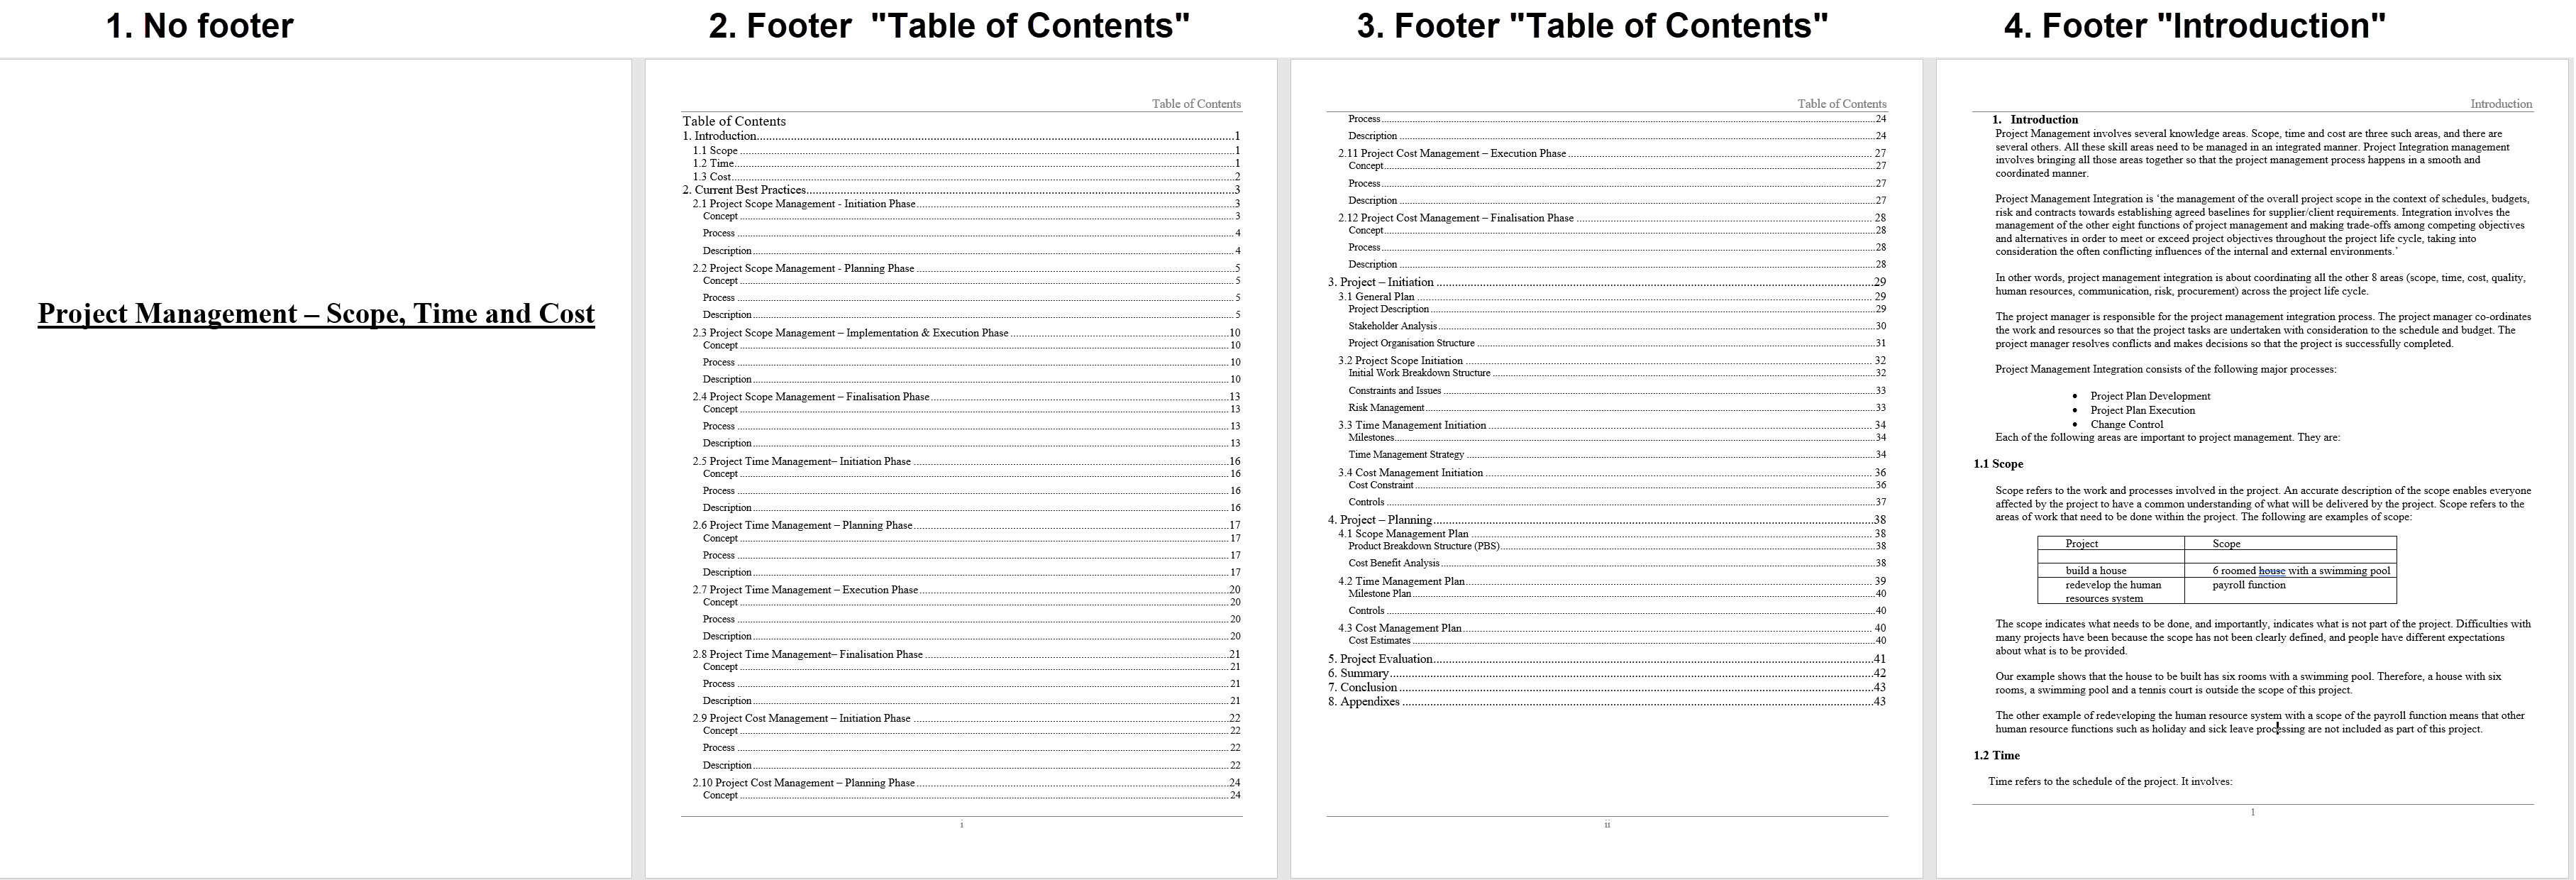 Example of different footers (1) No footer in title page (2) Footer with page numbers in Roman numeral format in 